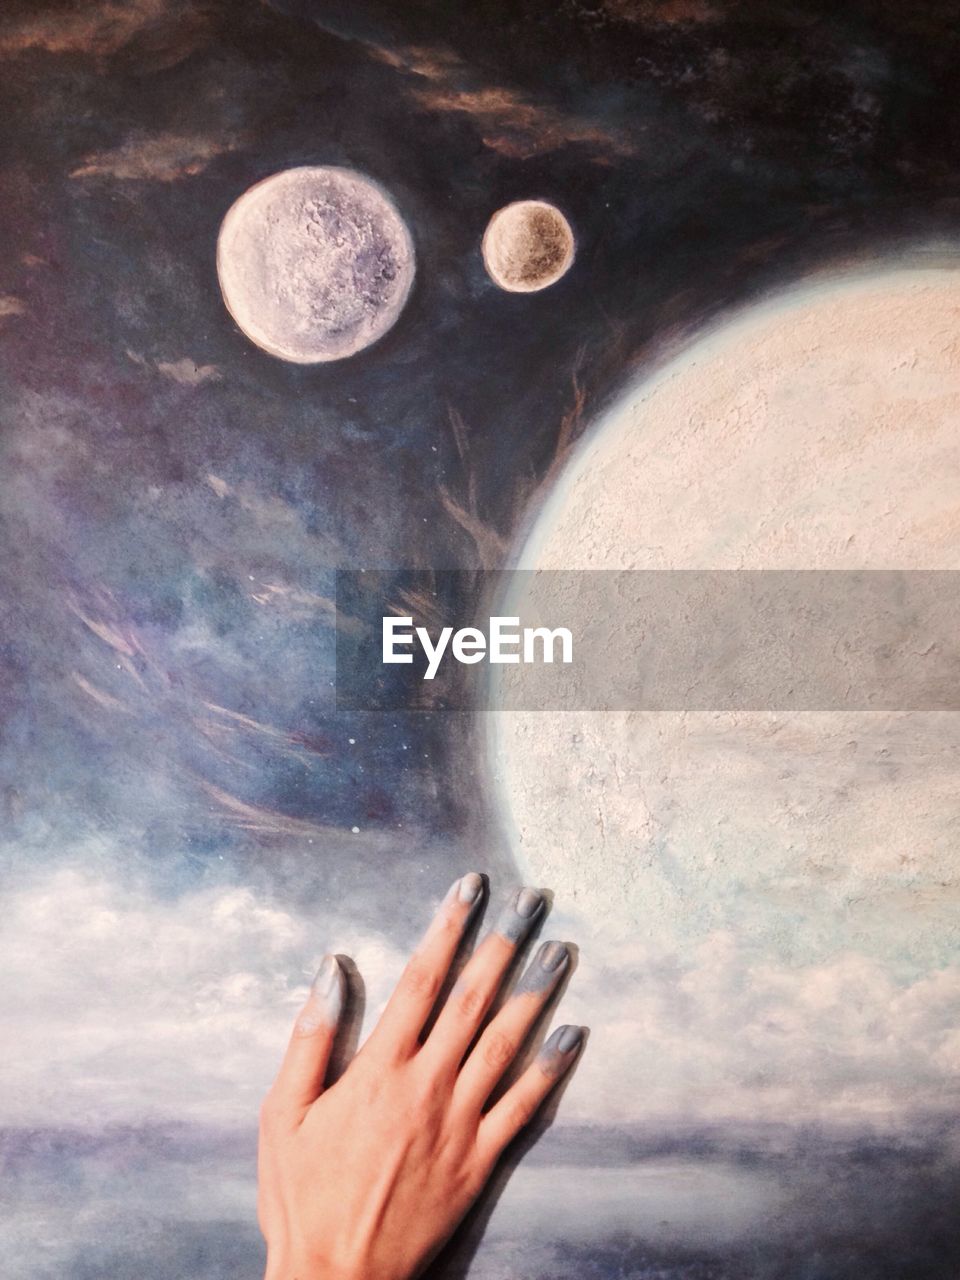 CLOSE-UP OF HAND AGAINST MOON